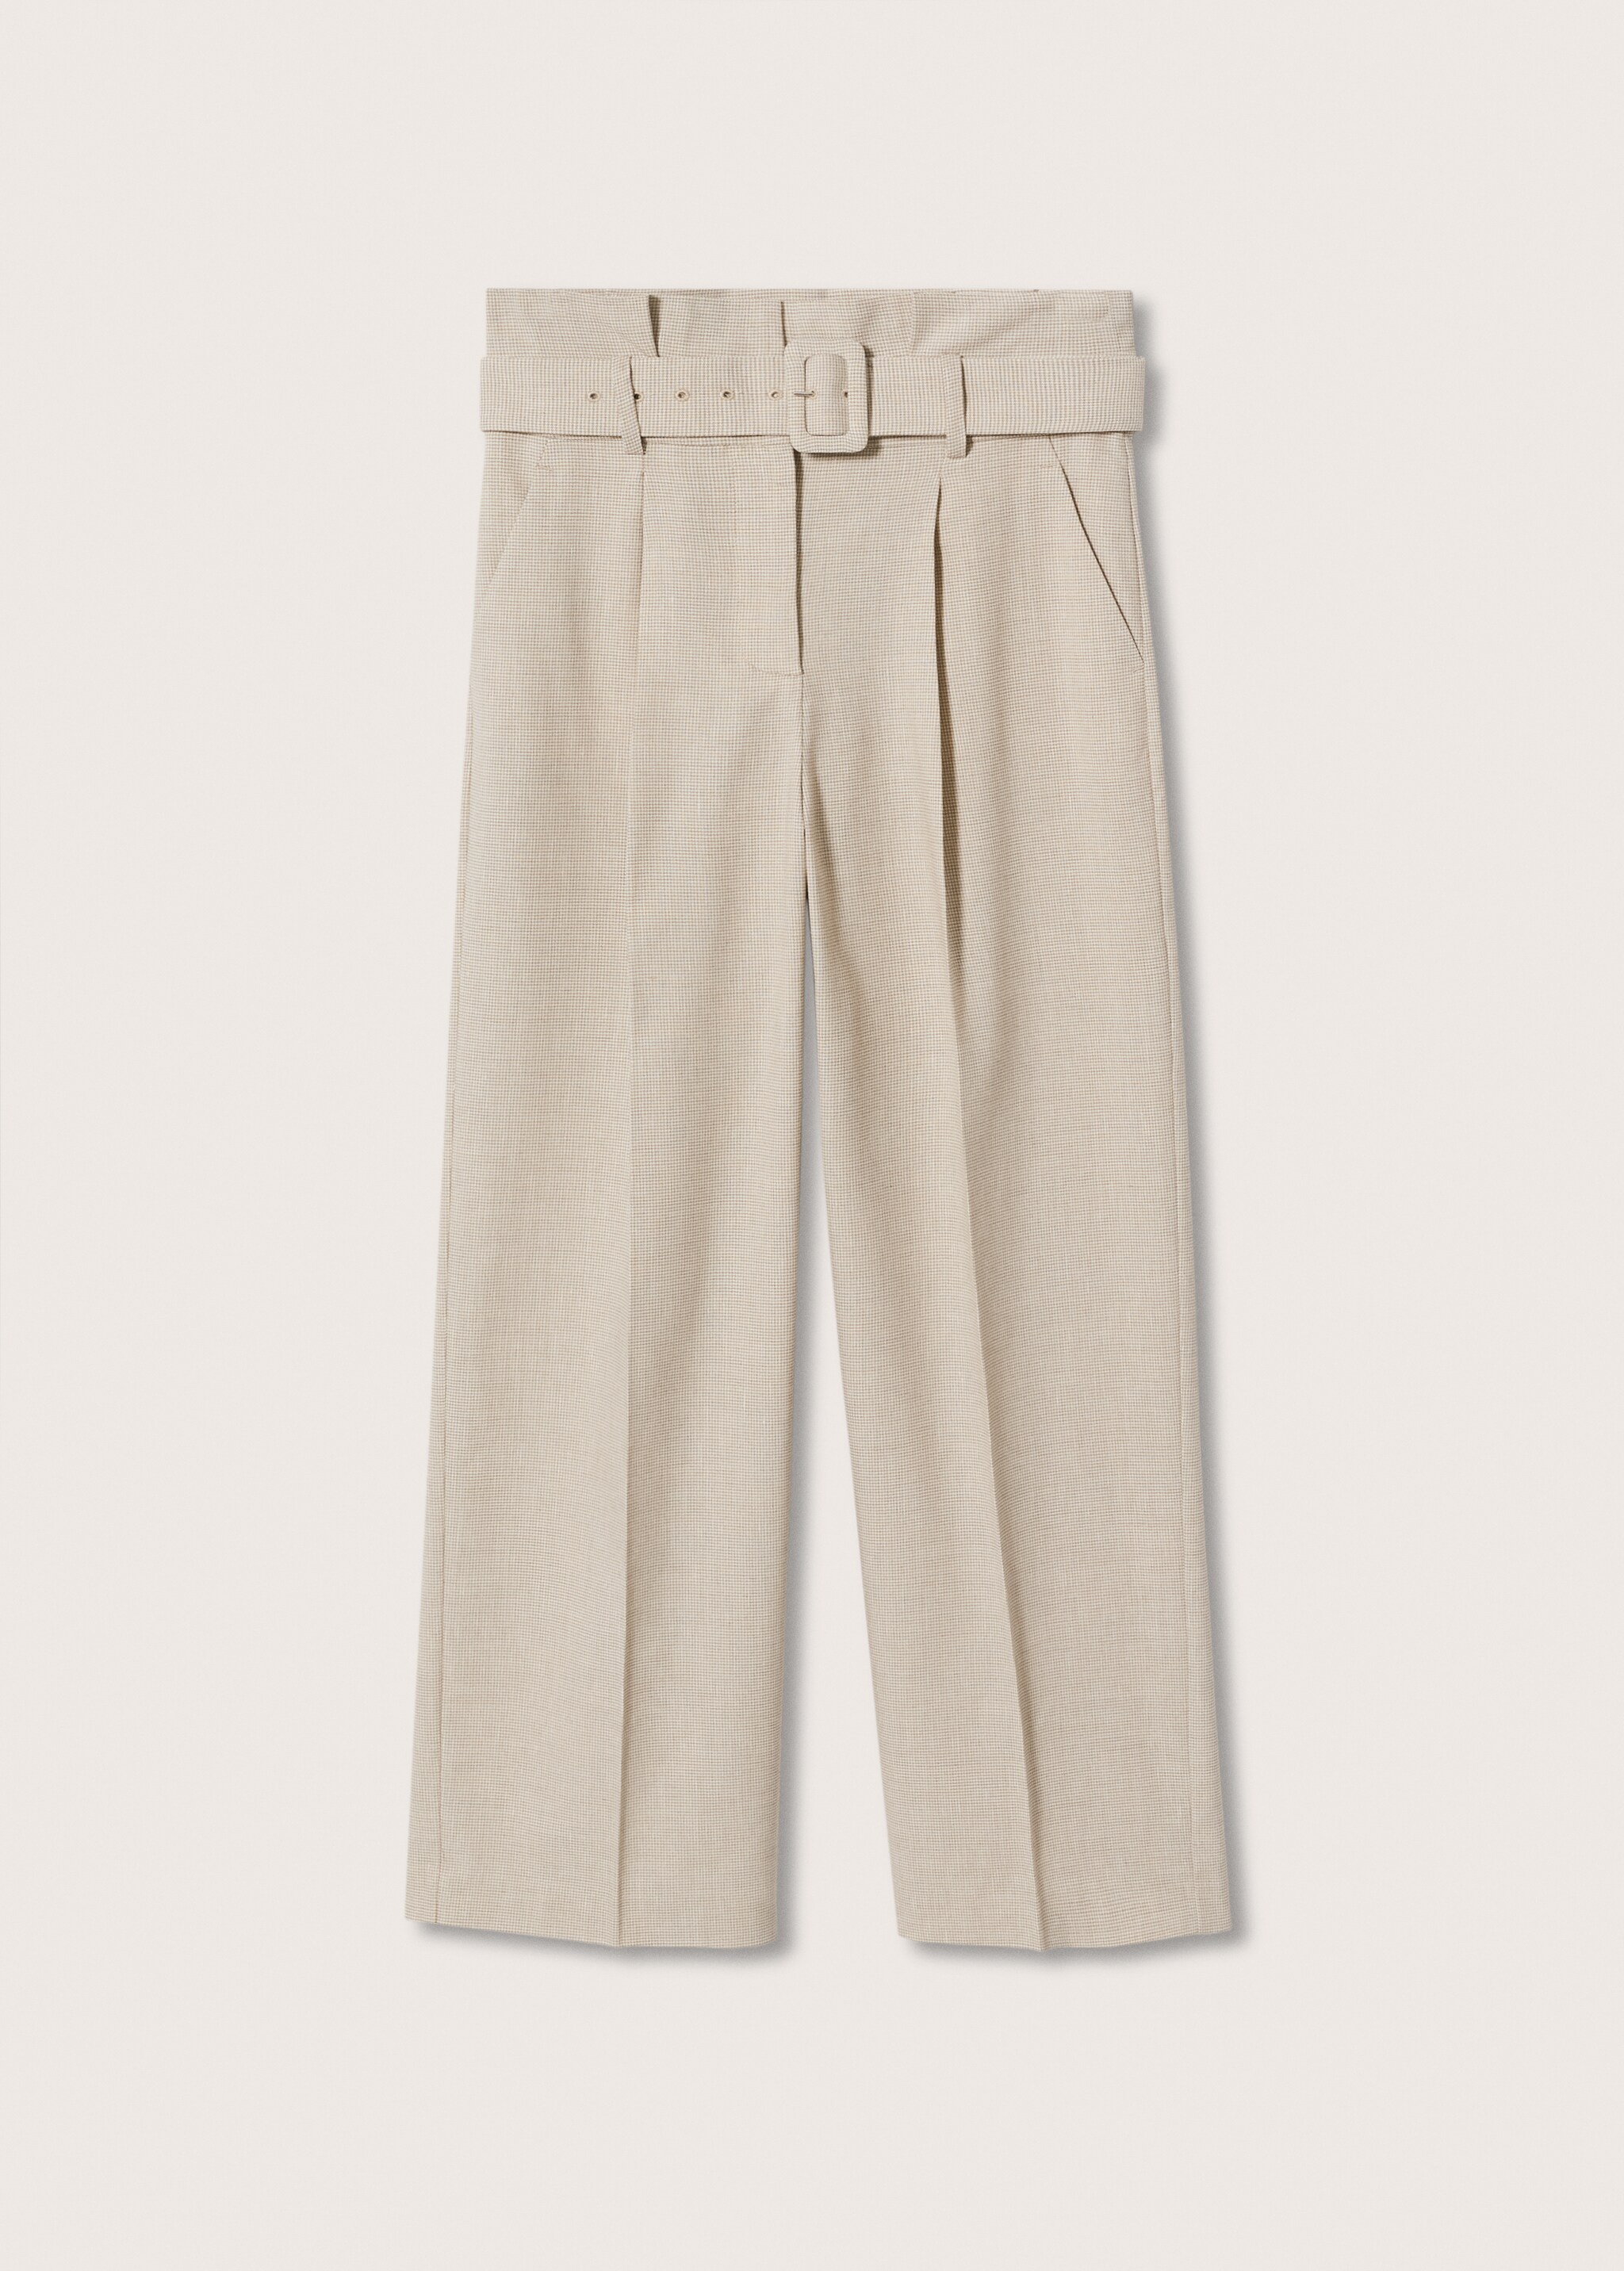 Belt check trousers - Article without model